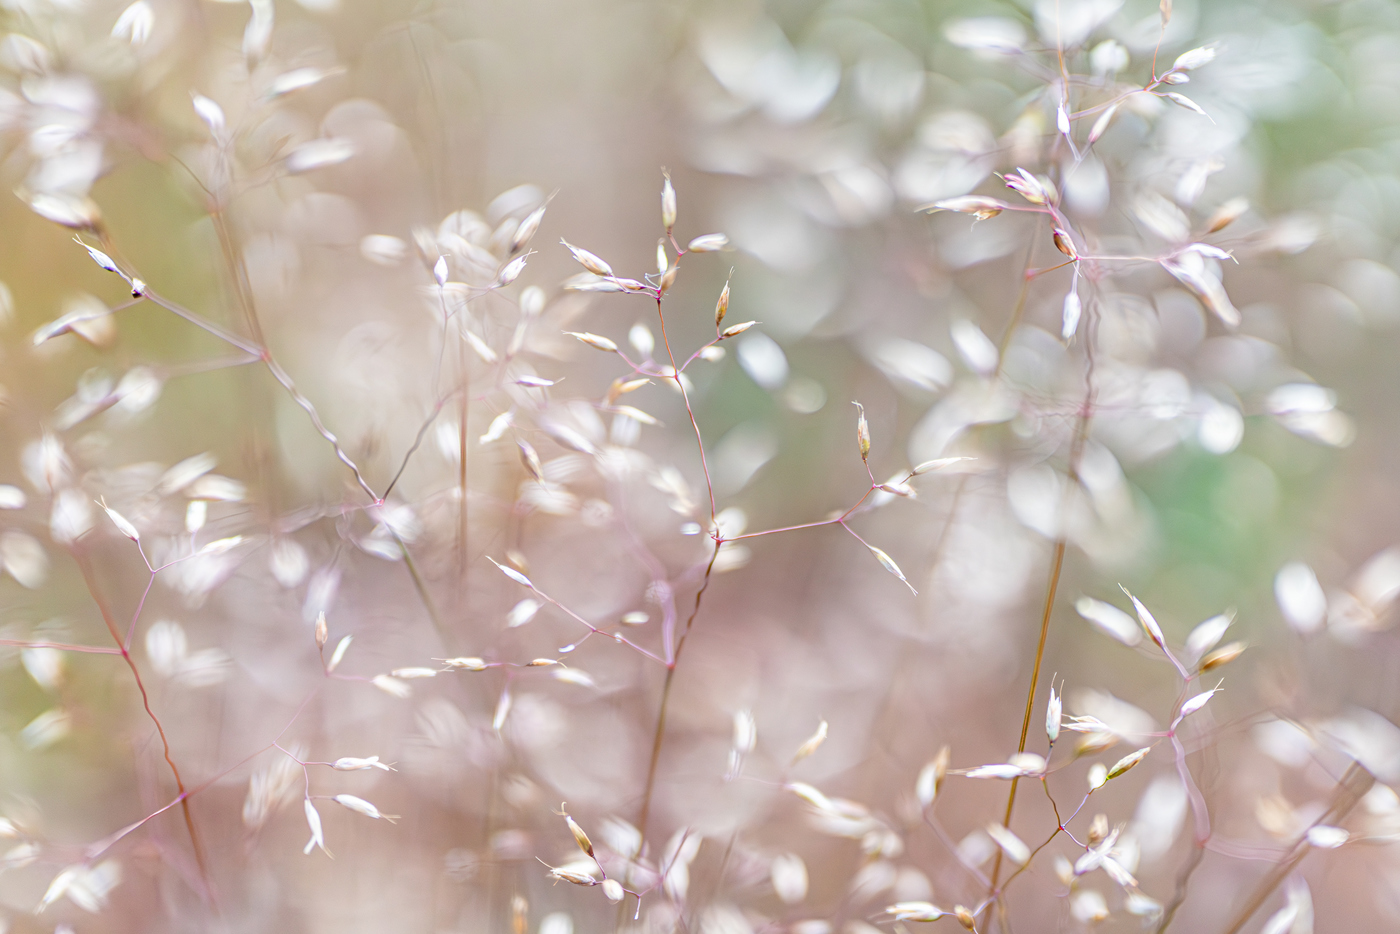 A soft-focused image of delicate grasses in North Yorkshire, with sunlight filtering through. Tiny leaves dance on slender stems, creating a dreamy ambiance of blush and warm white tones that seem to shimmer gently in the light. close up of a plant